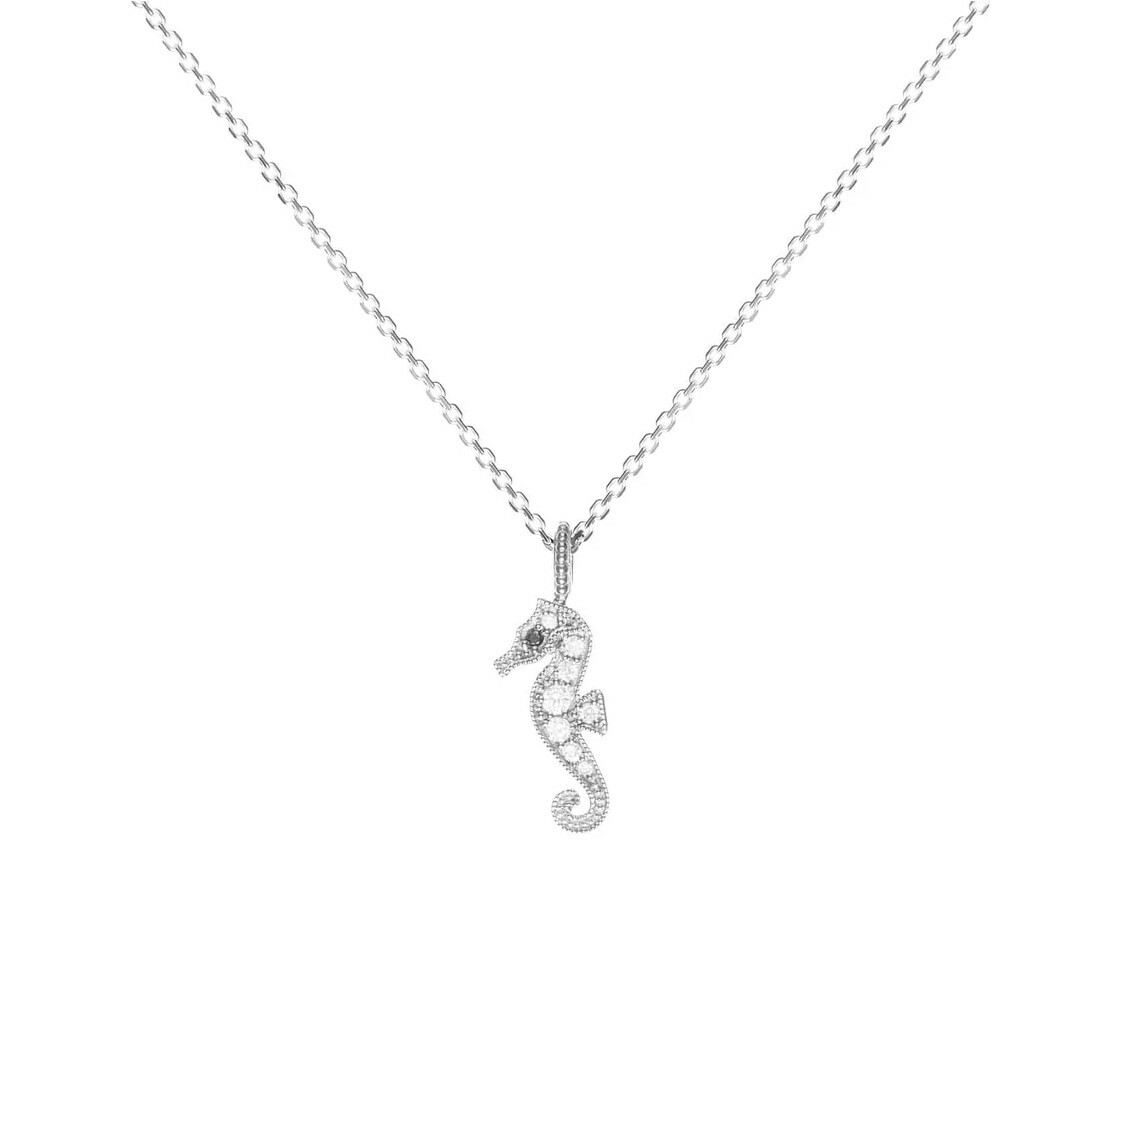 Purchase Stone Paris Seahorse Necklace in white gold and diamonds